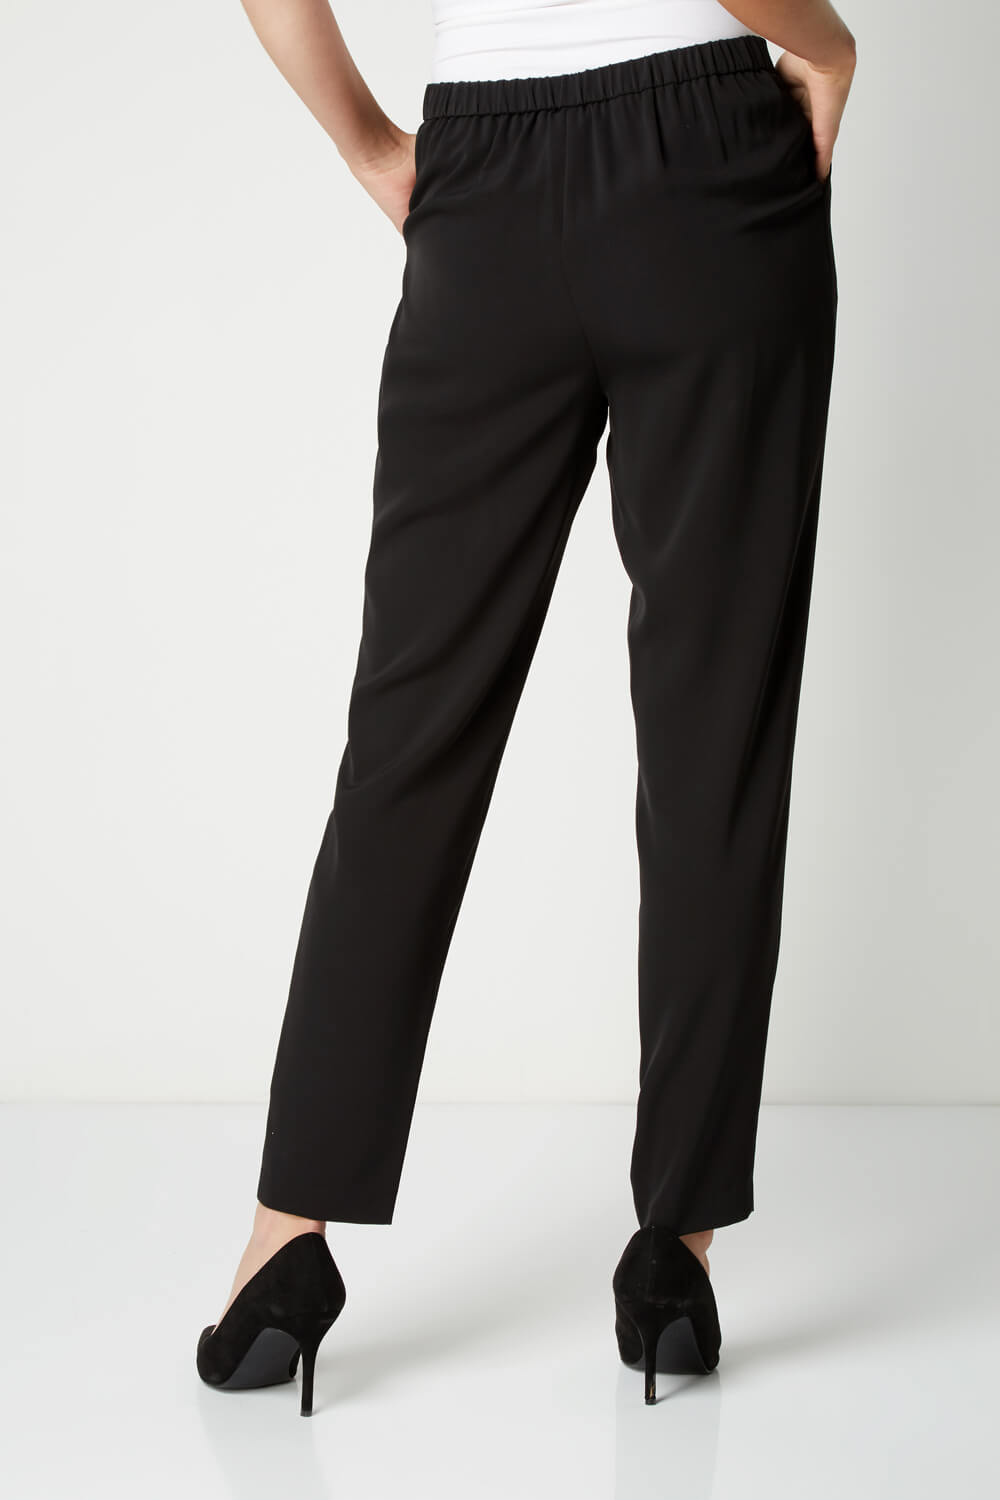 Black Tapered Harem Trousers, Image 2 of 4